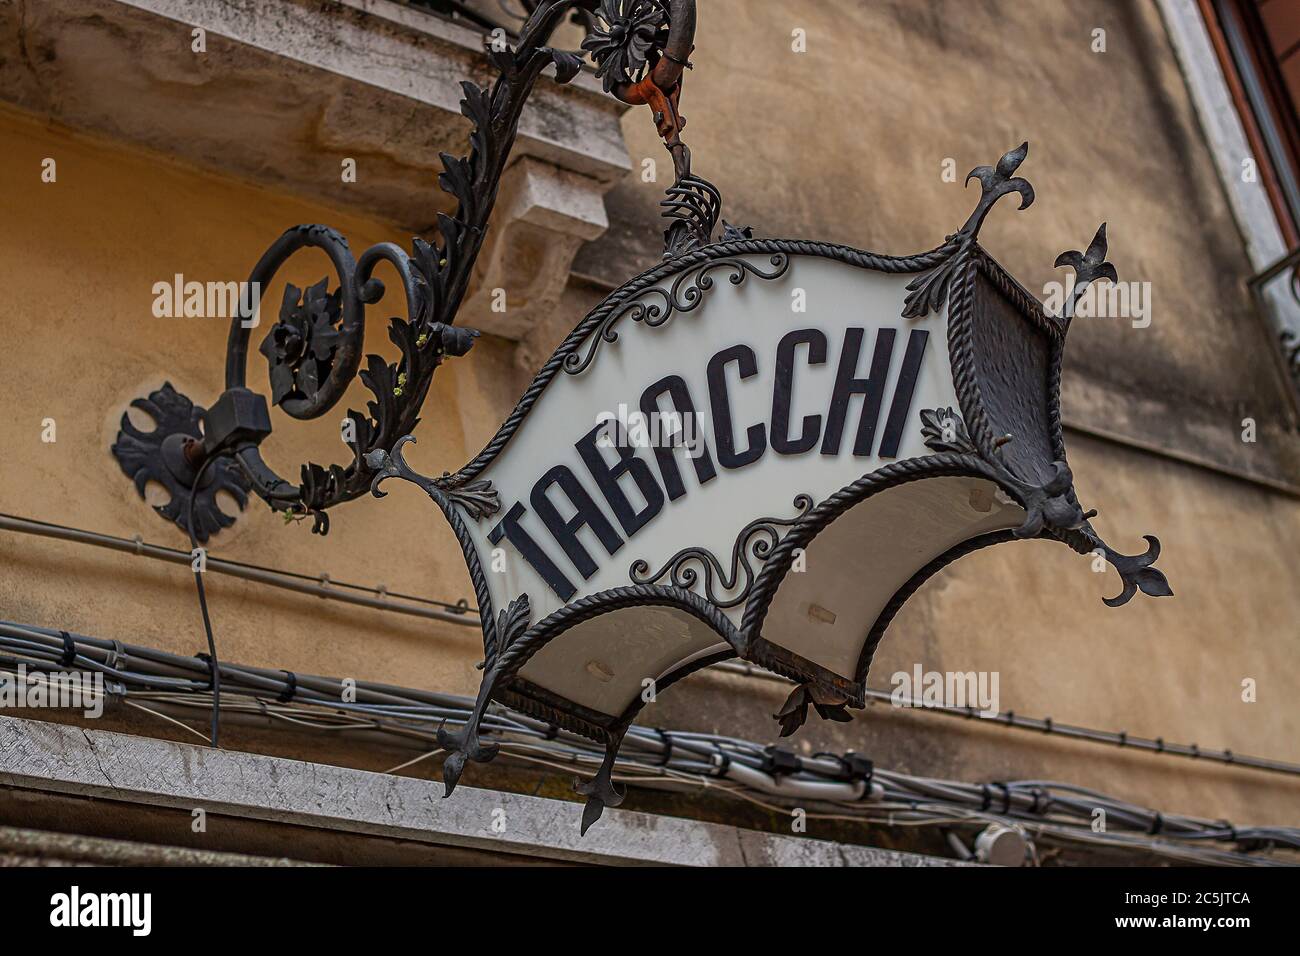 Tobacco shop sign in Venice, Italy Stock Photo